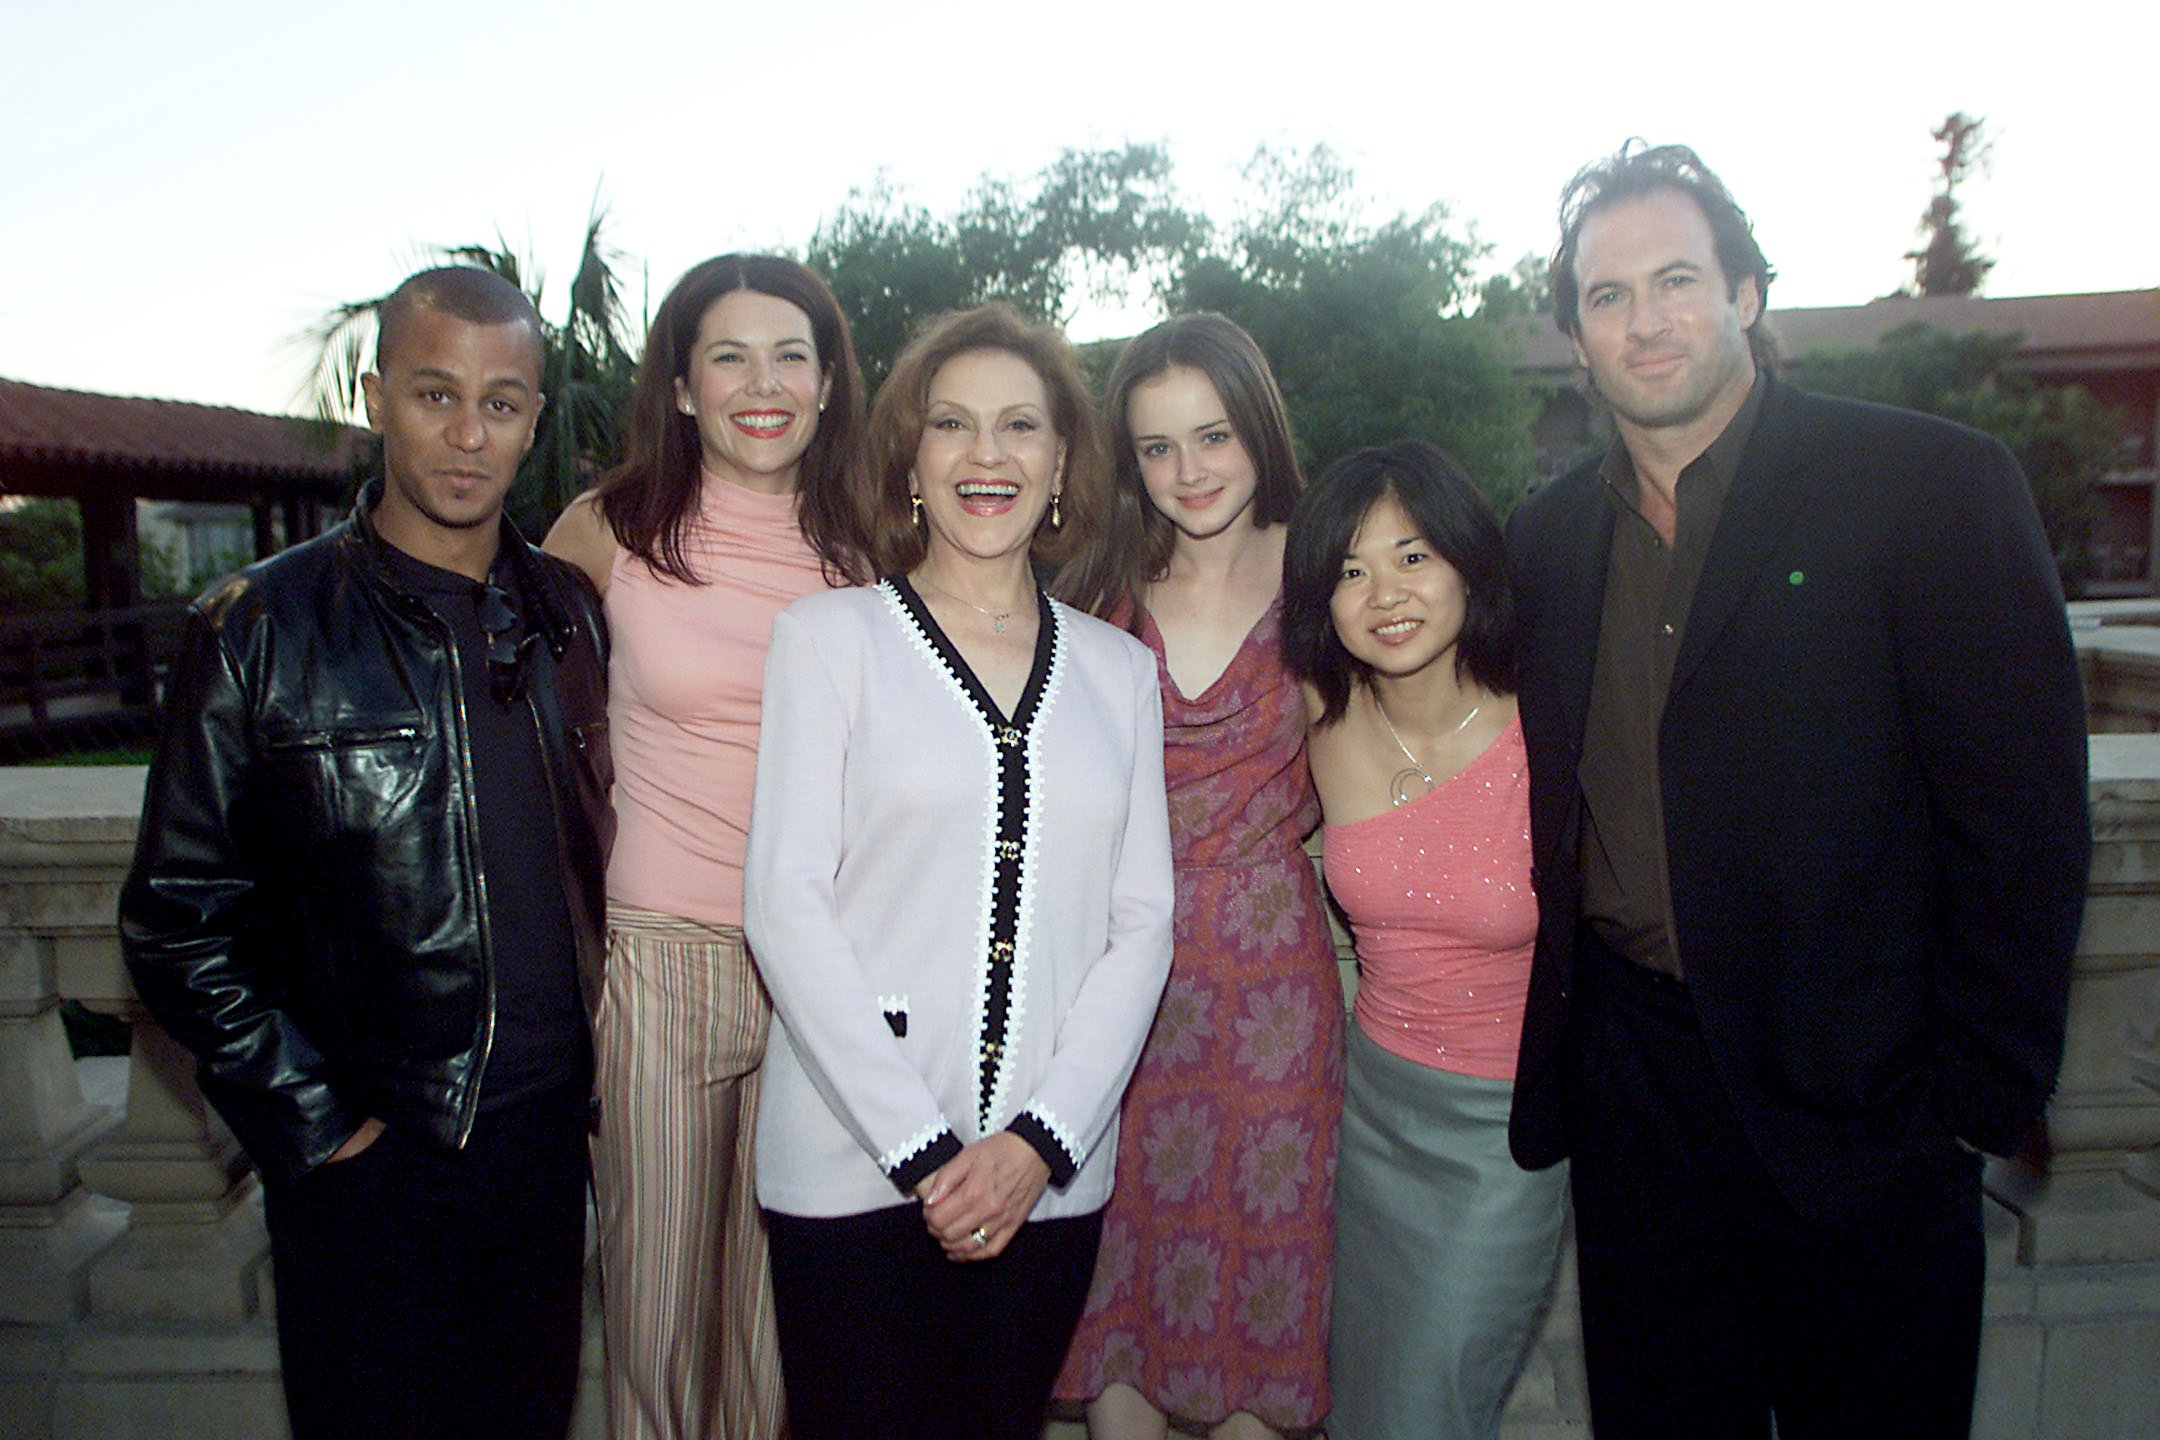 (L-R): Yanic Truesdale, Lauren Graham, Kelly Bishop, Alexis Bledel, Keiko Agena, and Scott Patterson of 'Gilmore Girls' at the 17th Annual TCA Awards held at the Ritz-Carlton Hotel in Huntington, CA., Saturday, July 21, 2001.